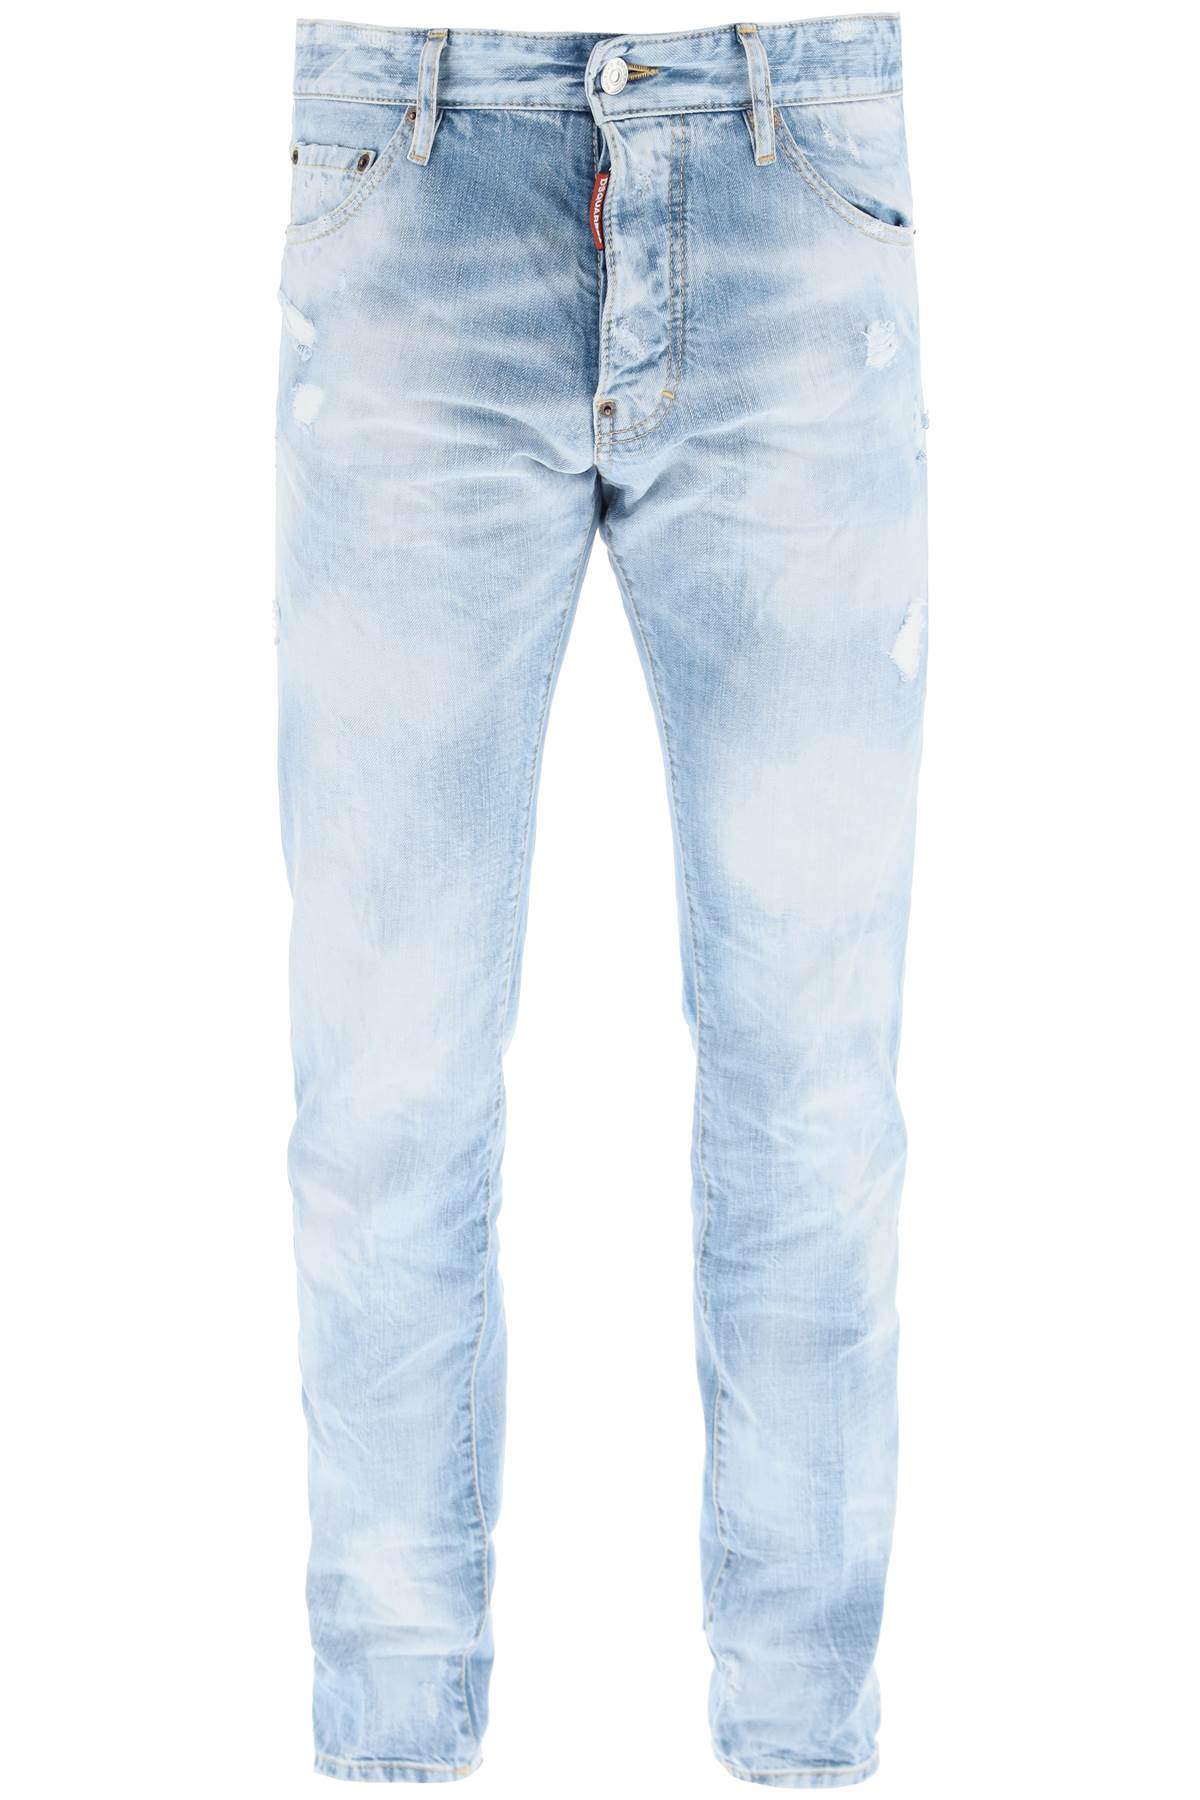 Dsquared2 Spring Sky Wash Cool Guy Jeans